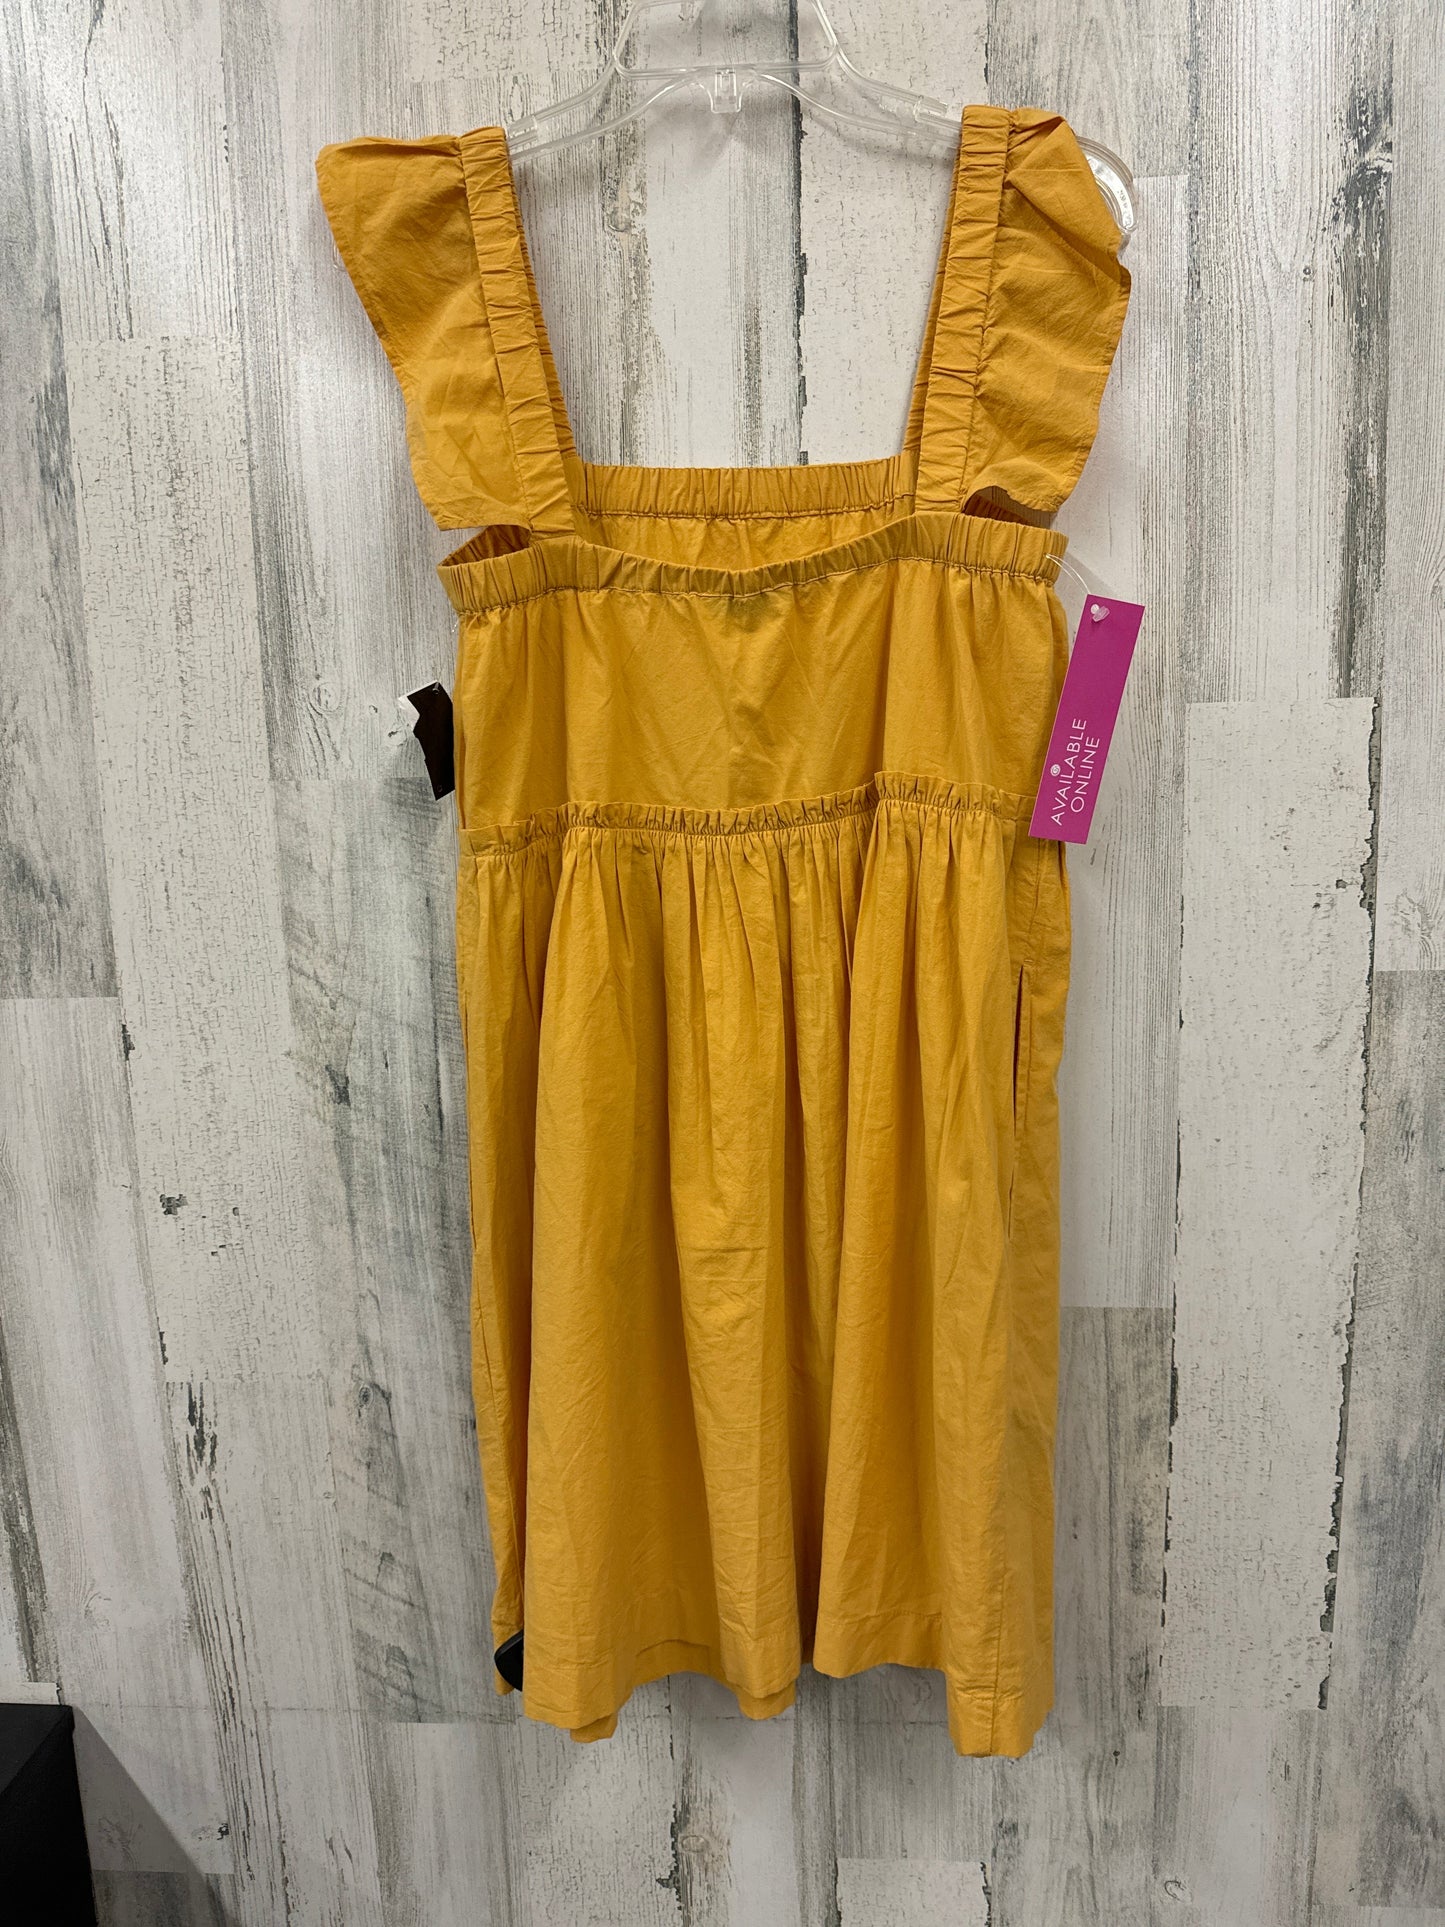 Yellow Dress Casual Short Madewell, Size S